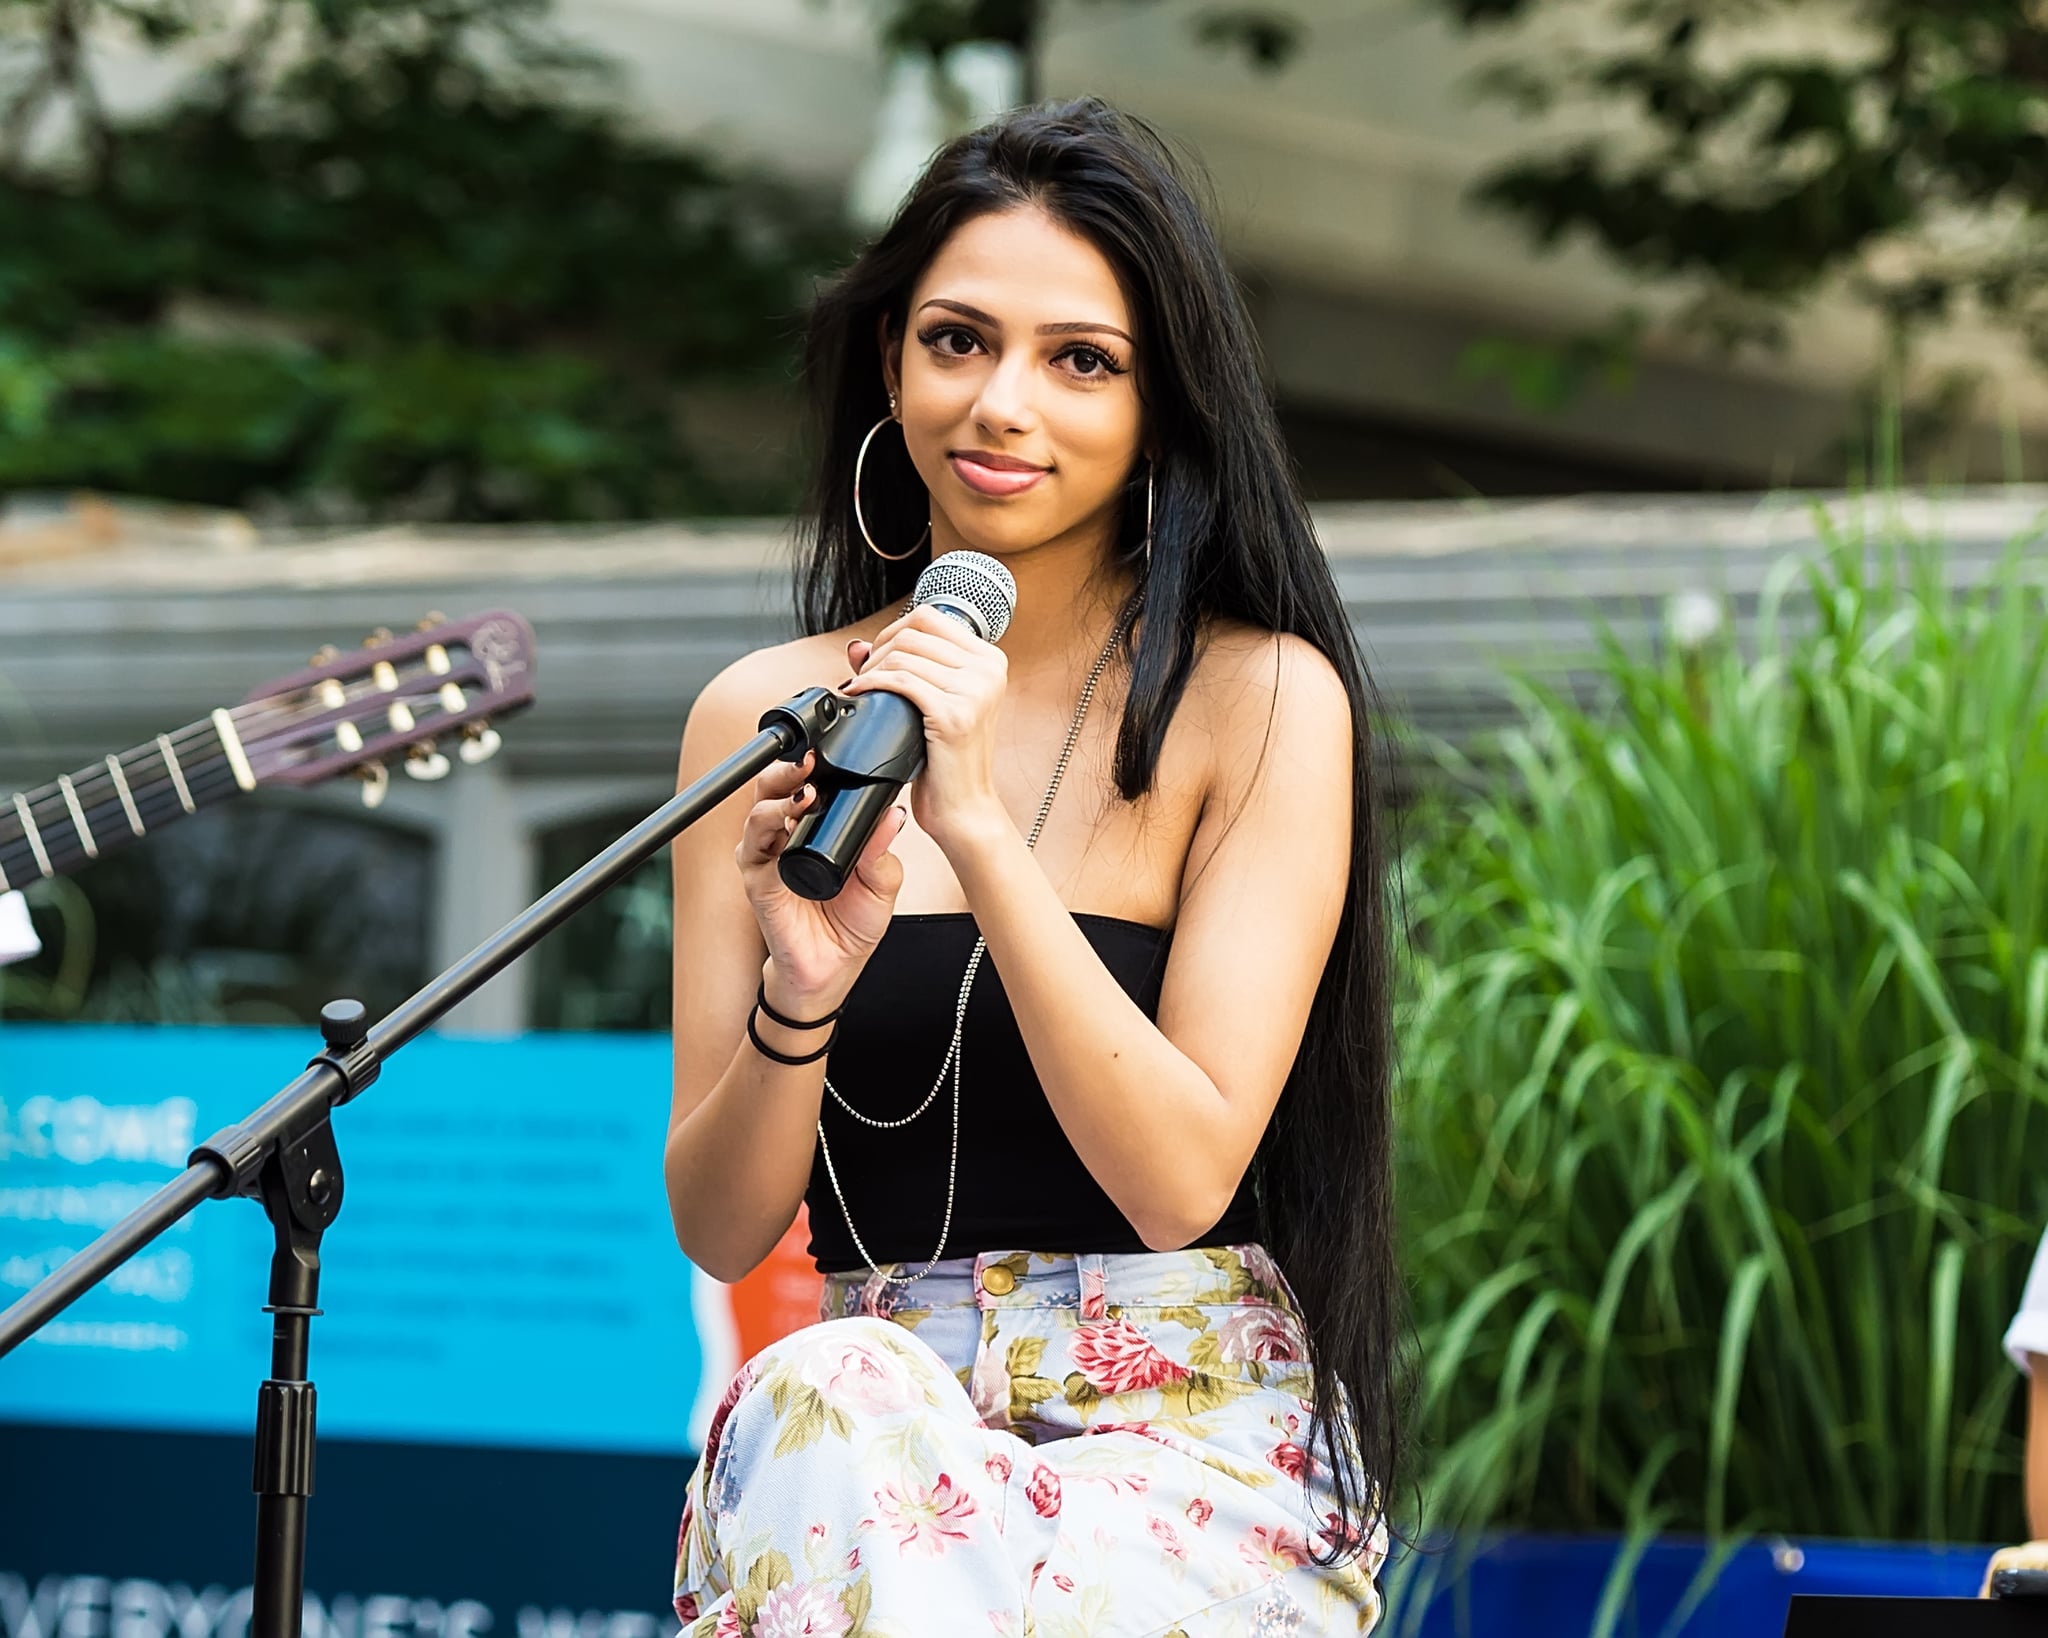 PHILADELPHIA, PENNSYLVANIA - JUNE 25: Singer Saleka Shyamalan performs during Wawa Welcome America 2021 at LOVE Park on June 25, 2021 in Philadelphia, Pennsylvania. (Photo by Gilbert Carrasquillo/Getty Images)